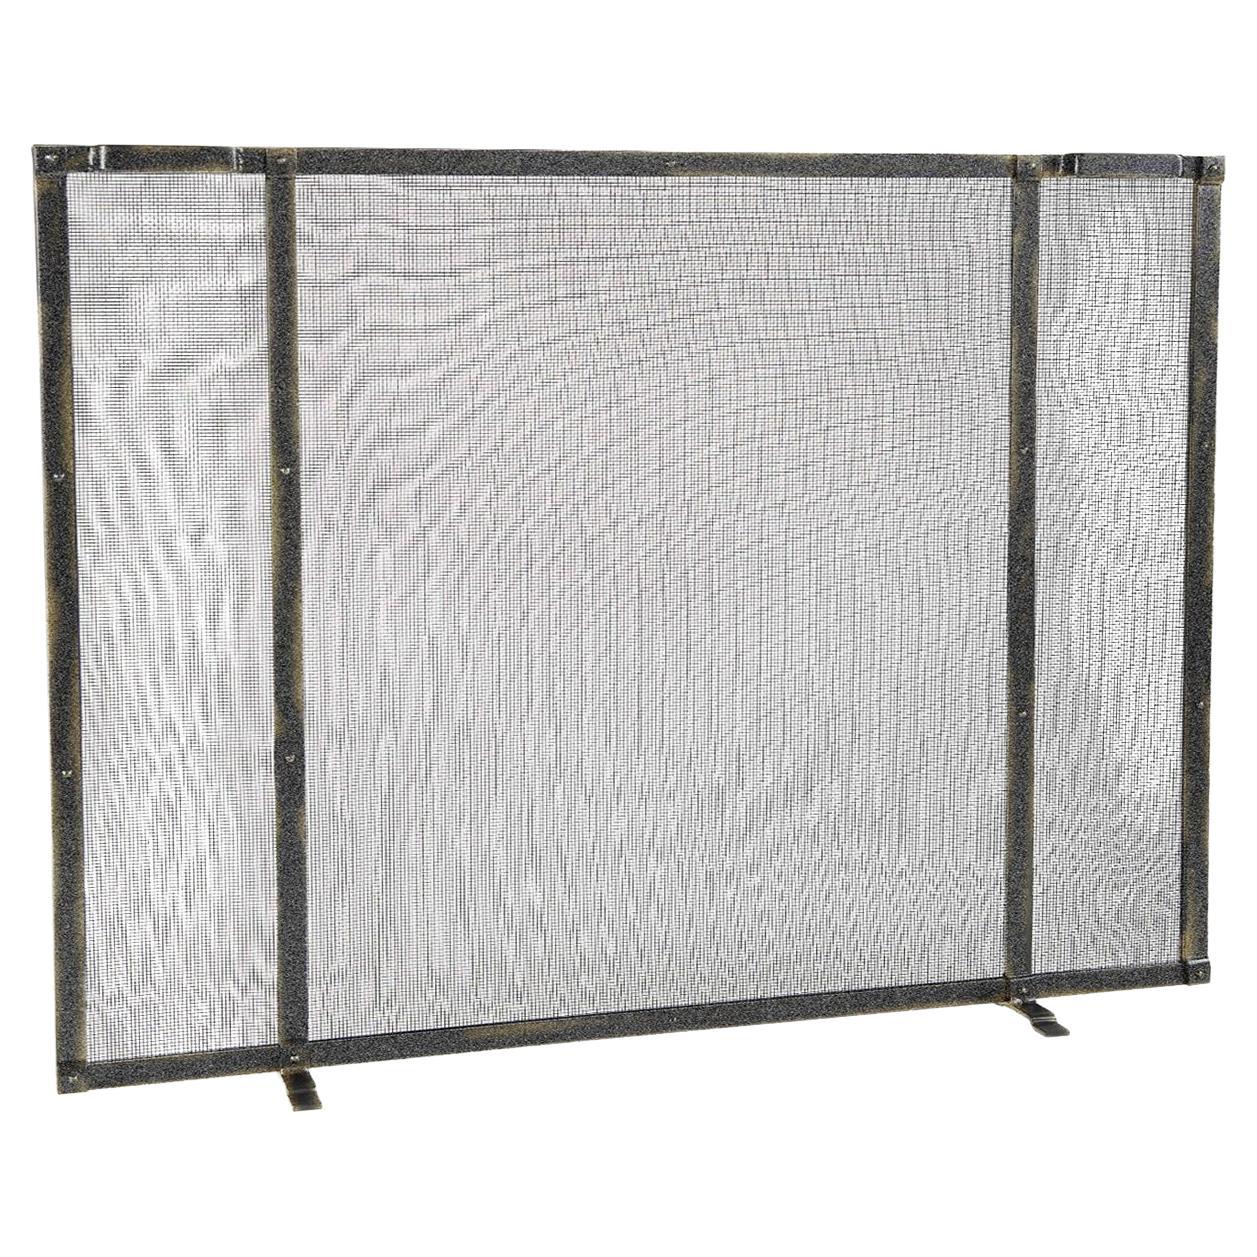 Gunnison Fireplace Screen in a Gold Rubbed Black Finish